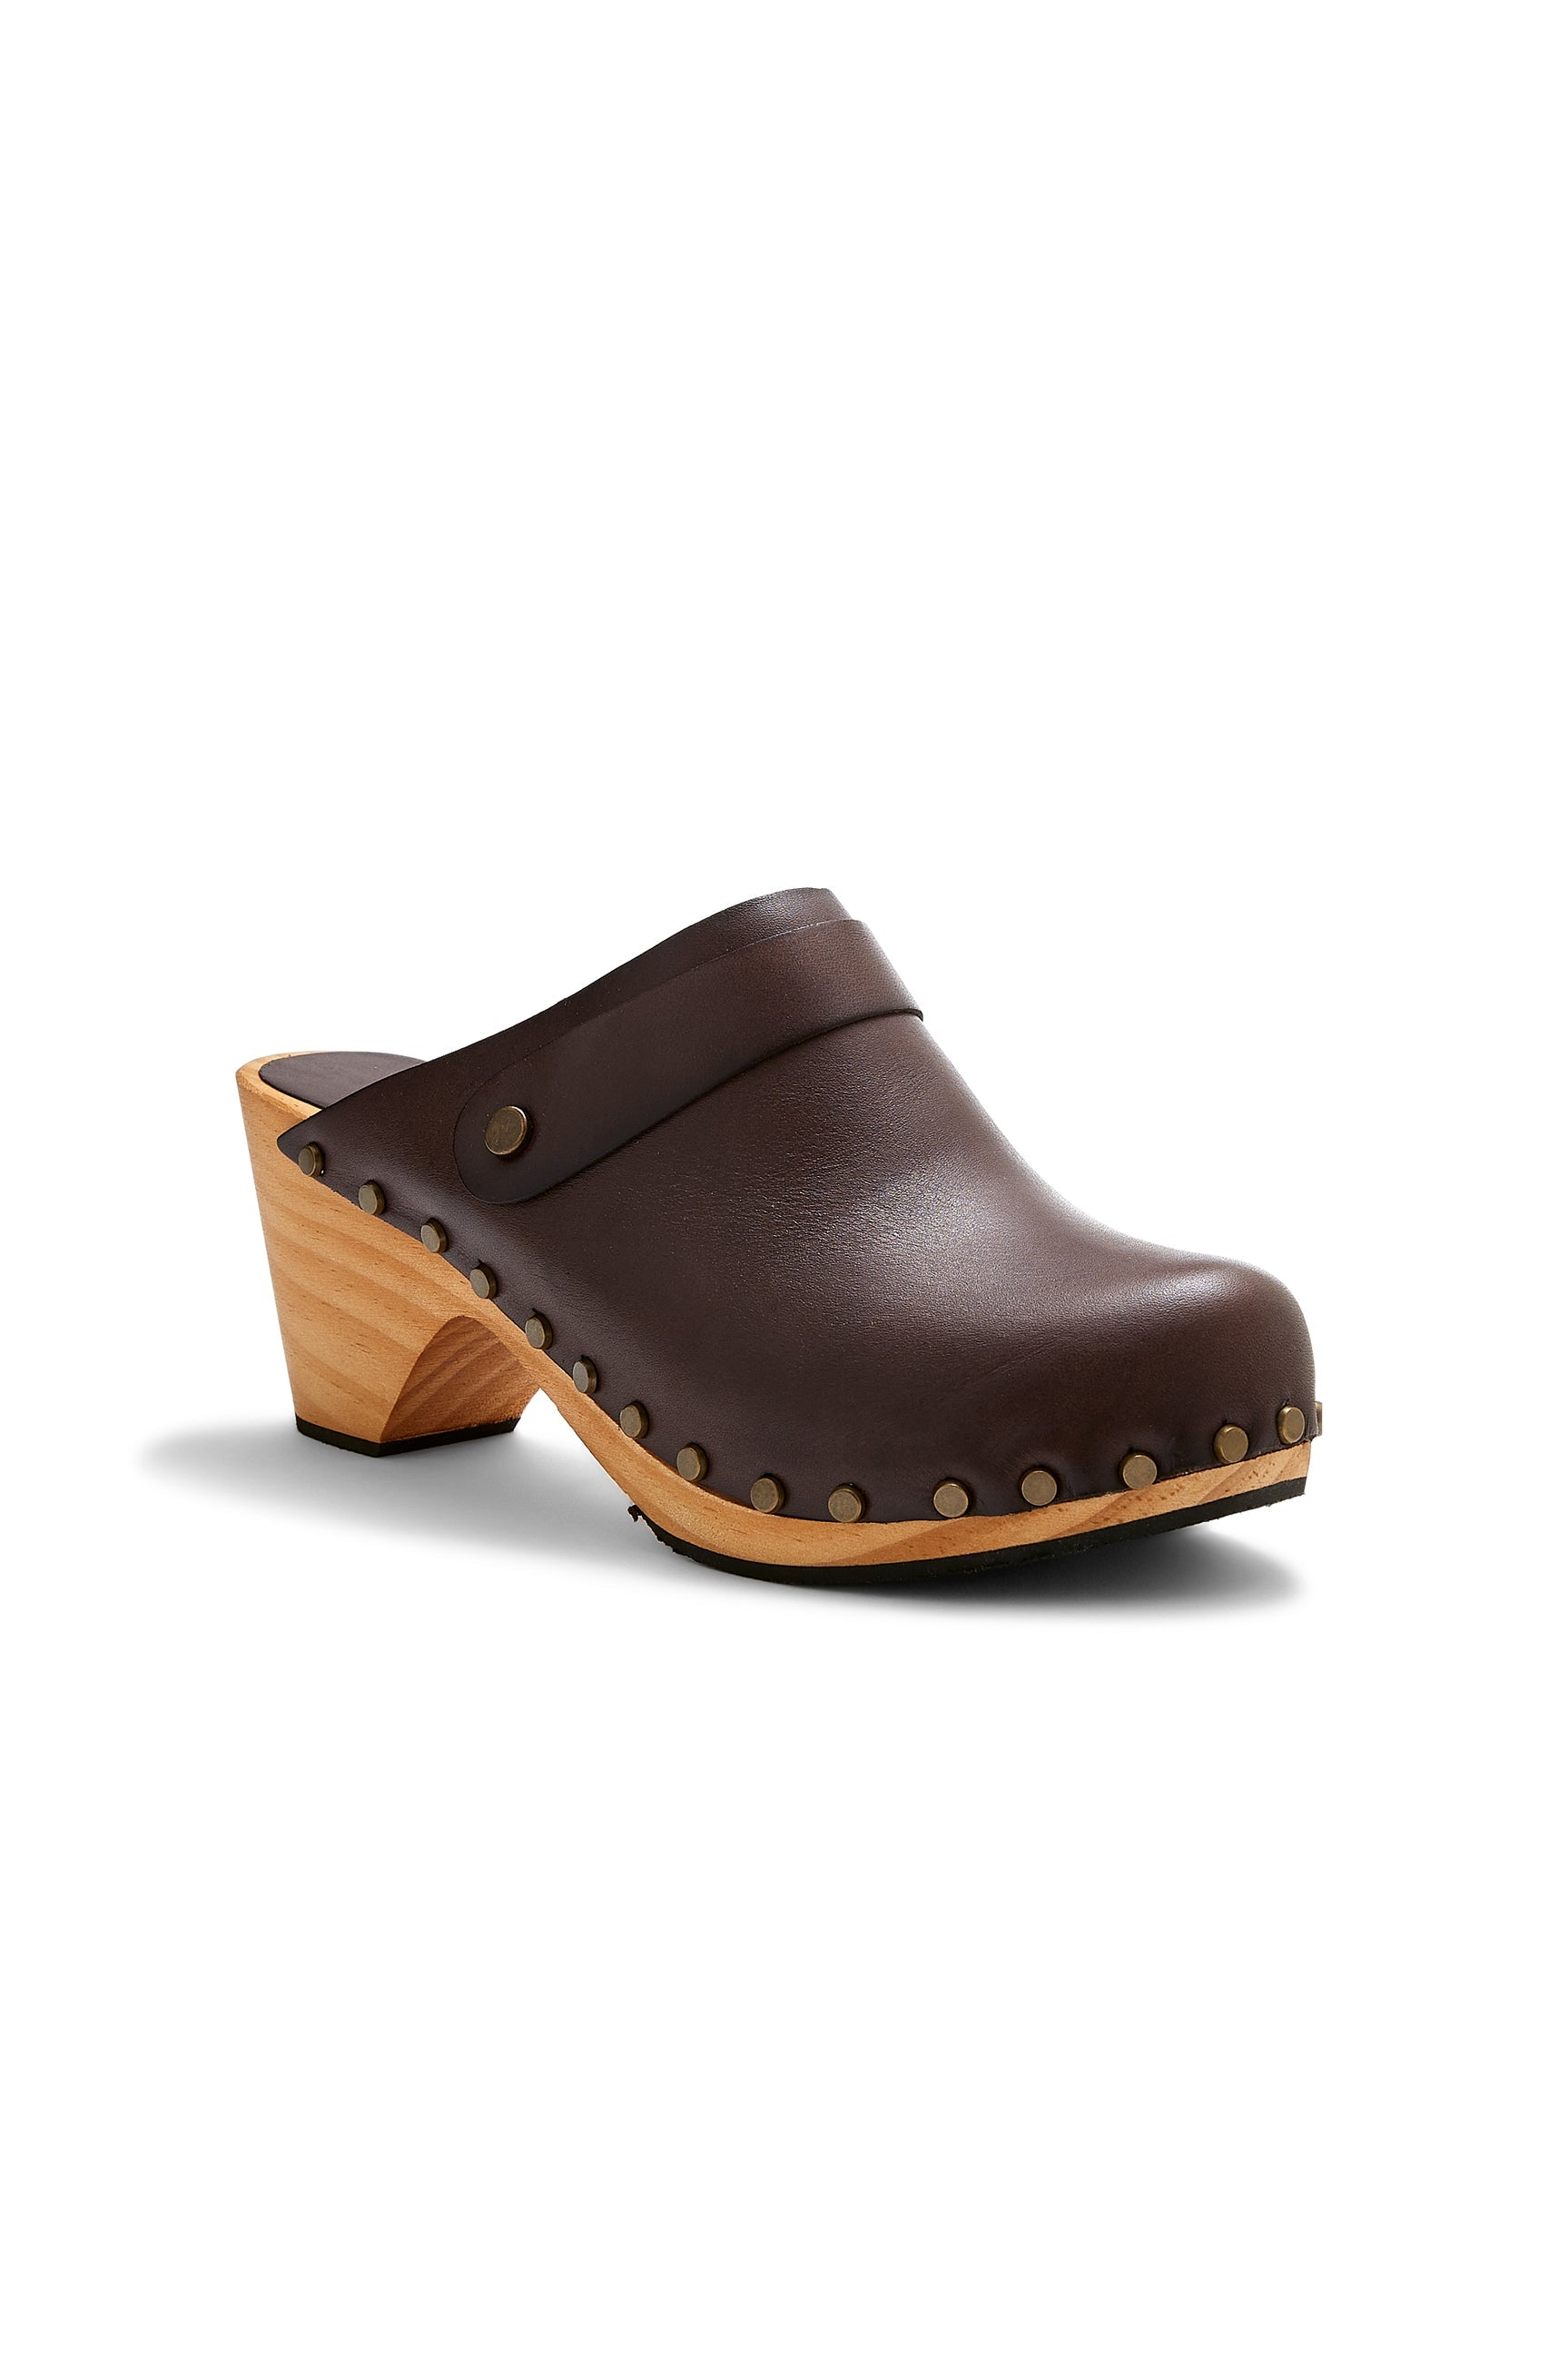 high heel classic clogs in dark brown - ships end of April Clogs lisa b. 